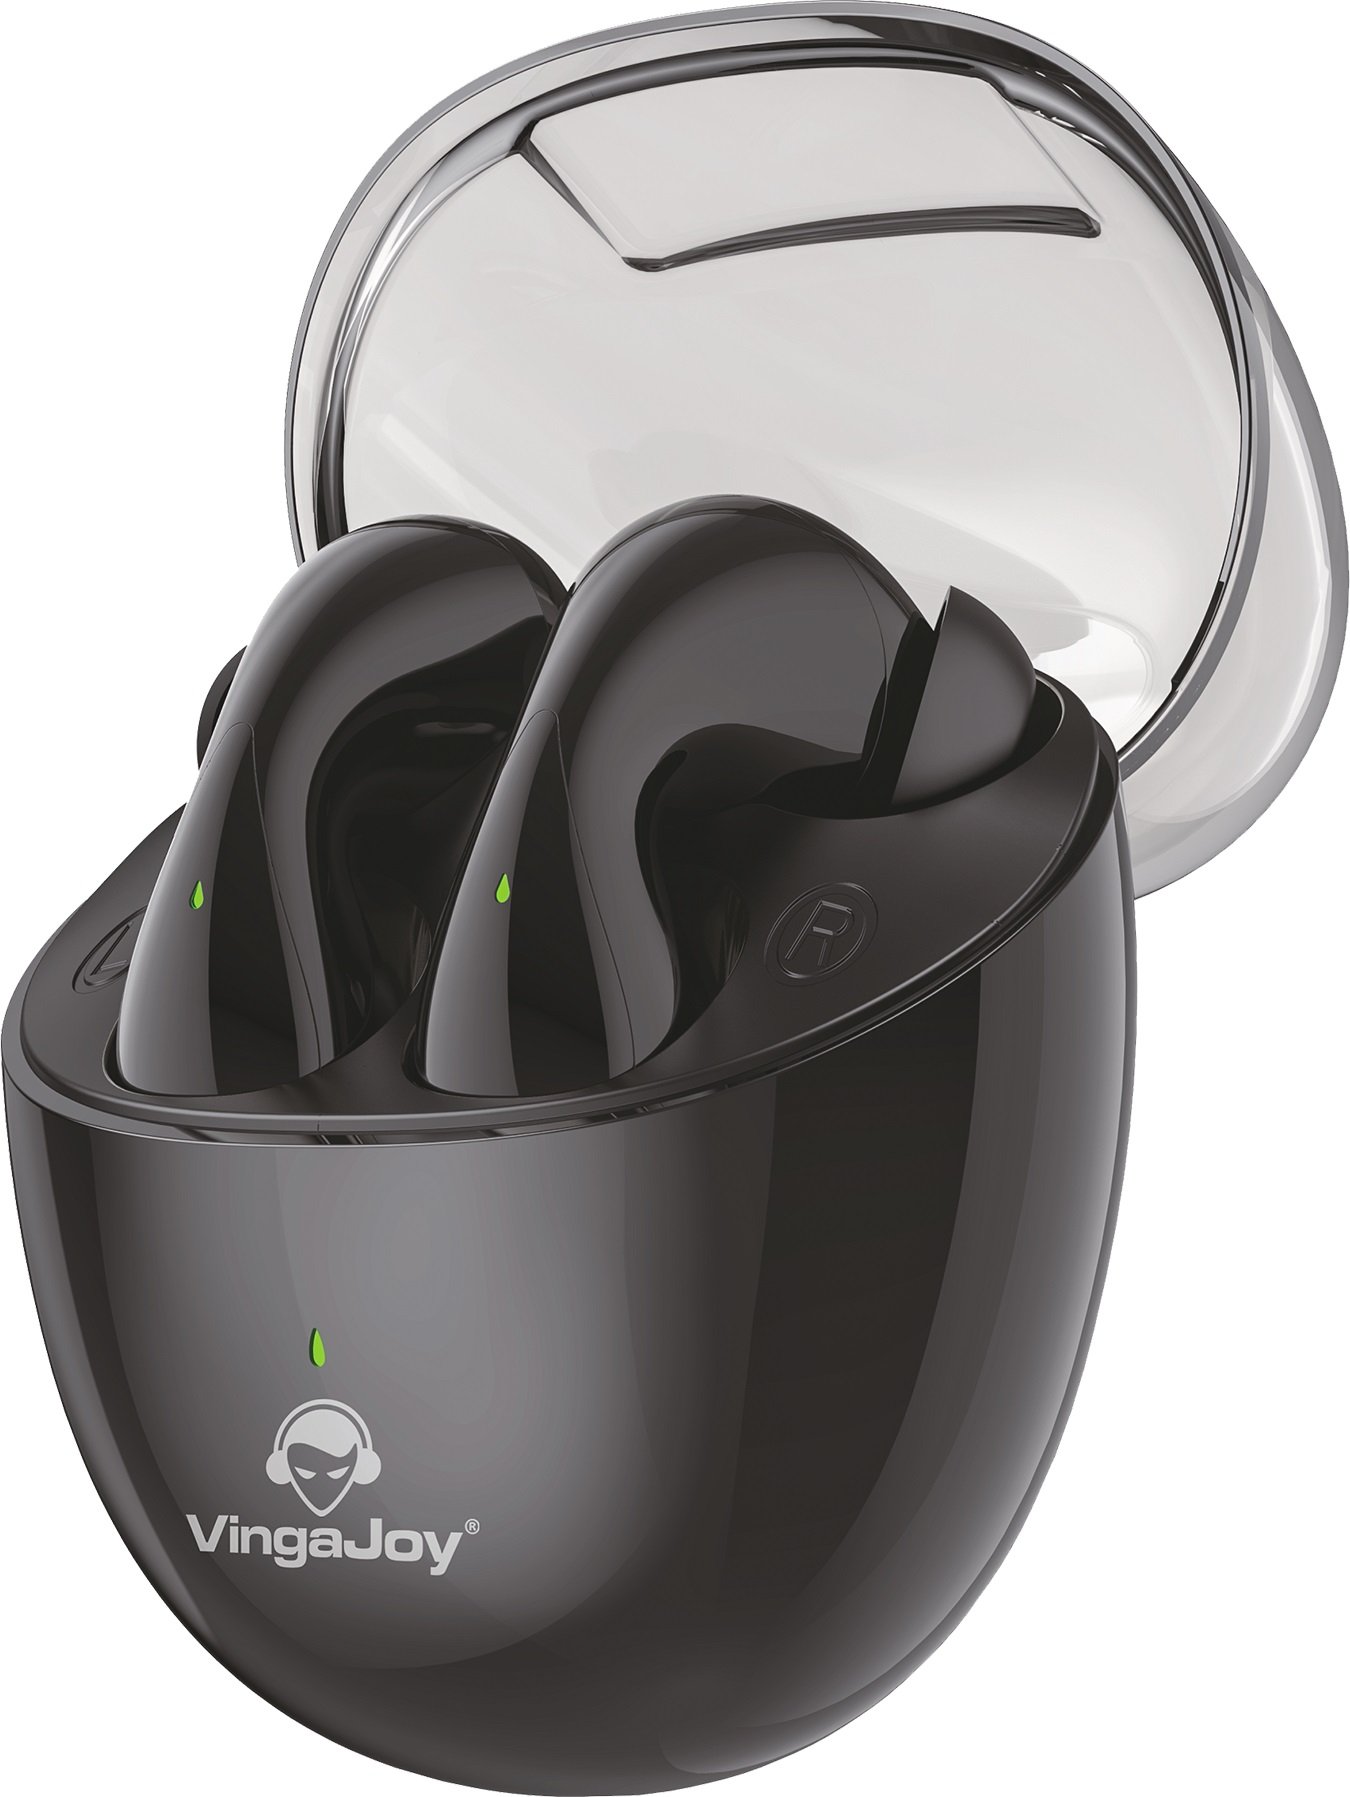 VingaJoy Launches BT-003 Infinite Series Wireless Earbuds in India